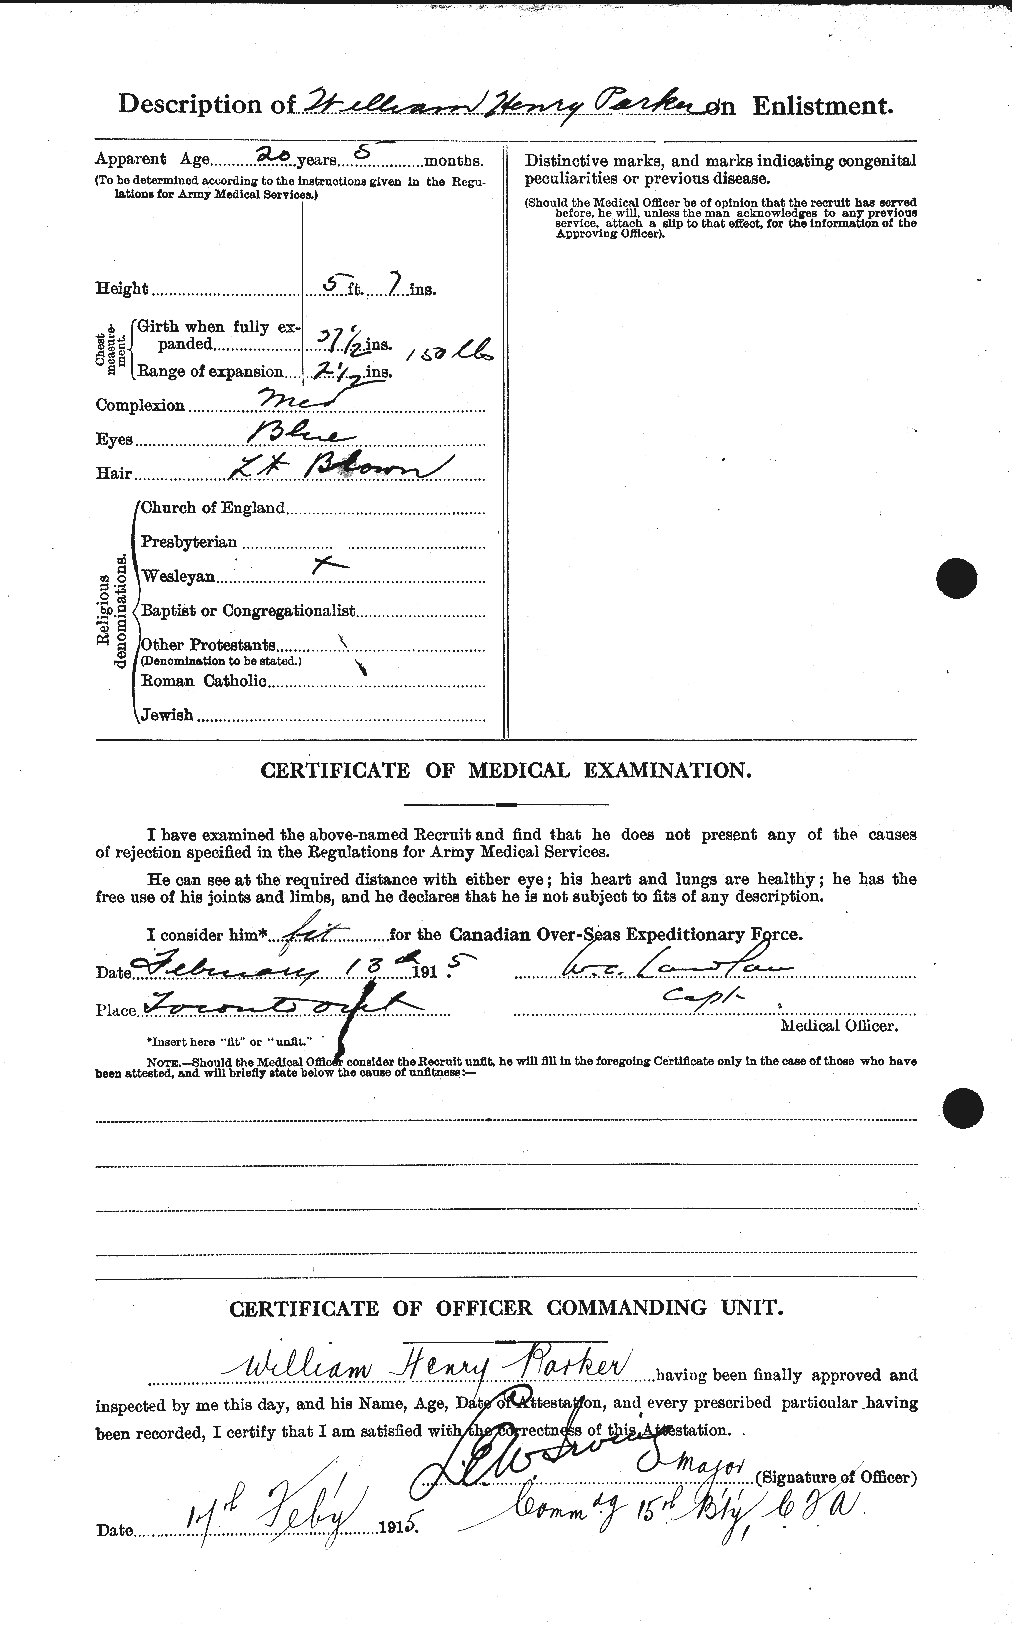 Personnel Records of the First World War - CEF 565757b